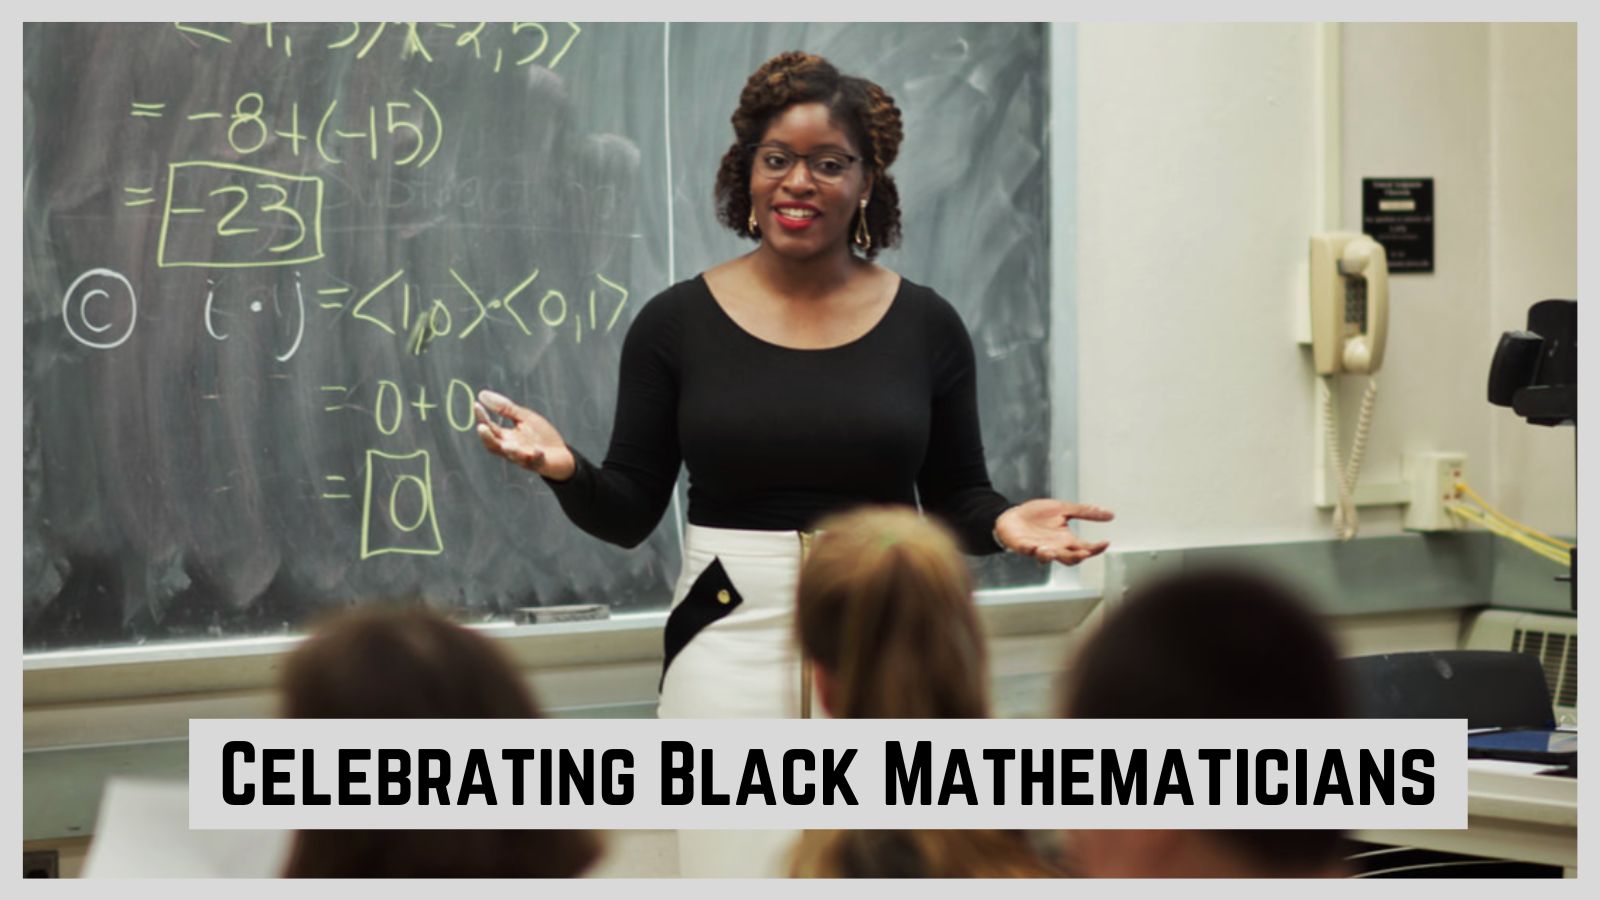 stock photo of black female mathematician in front of chalkboard with text: celebrating black mathematicians